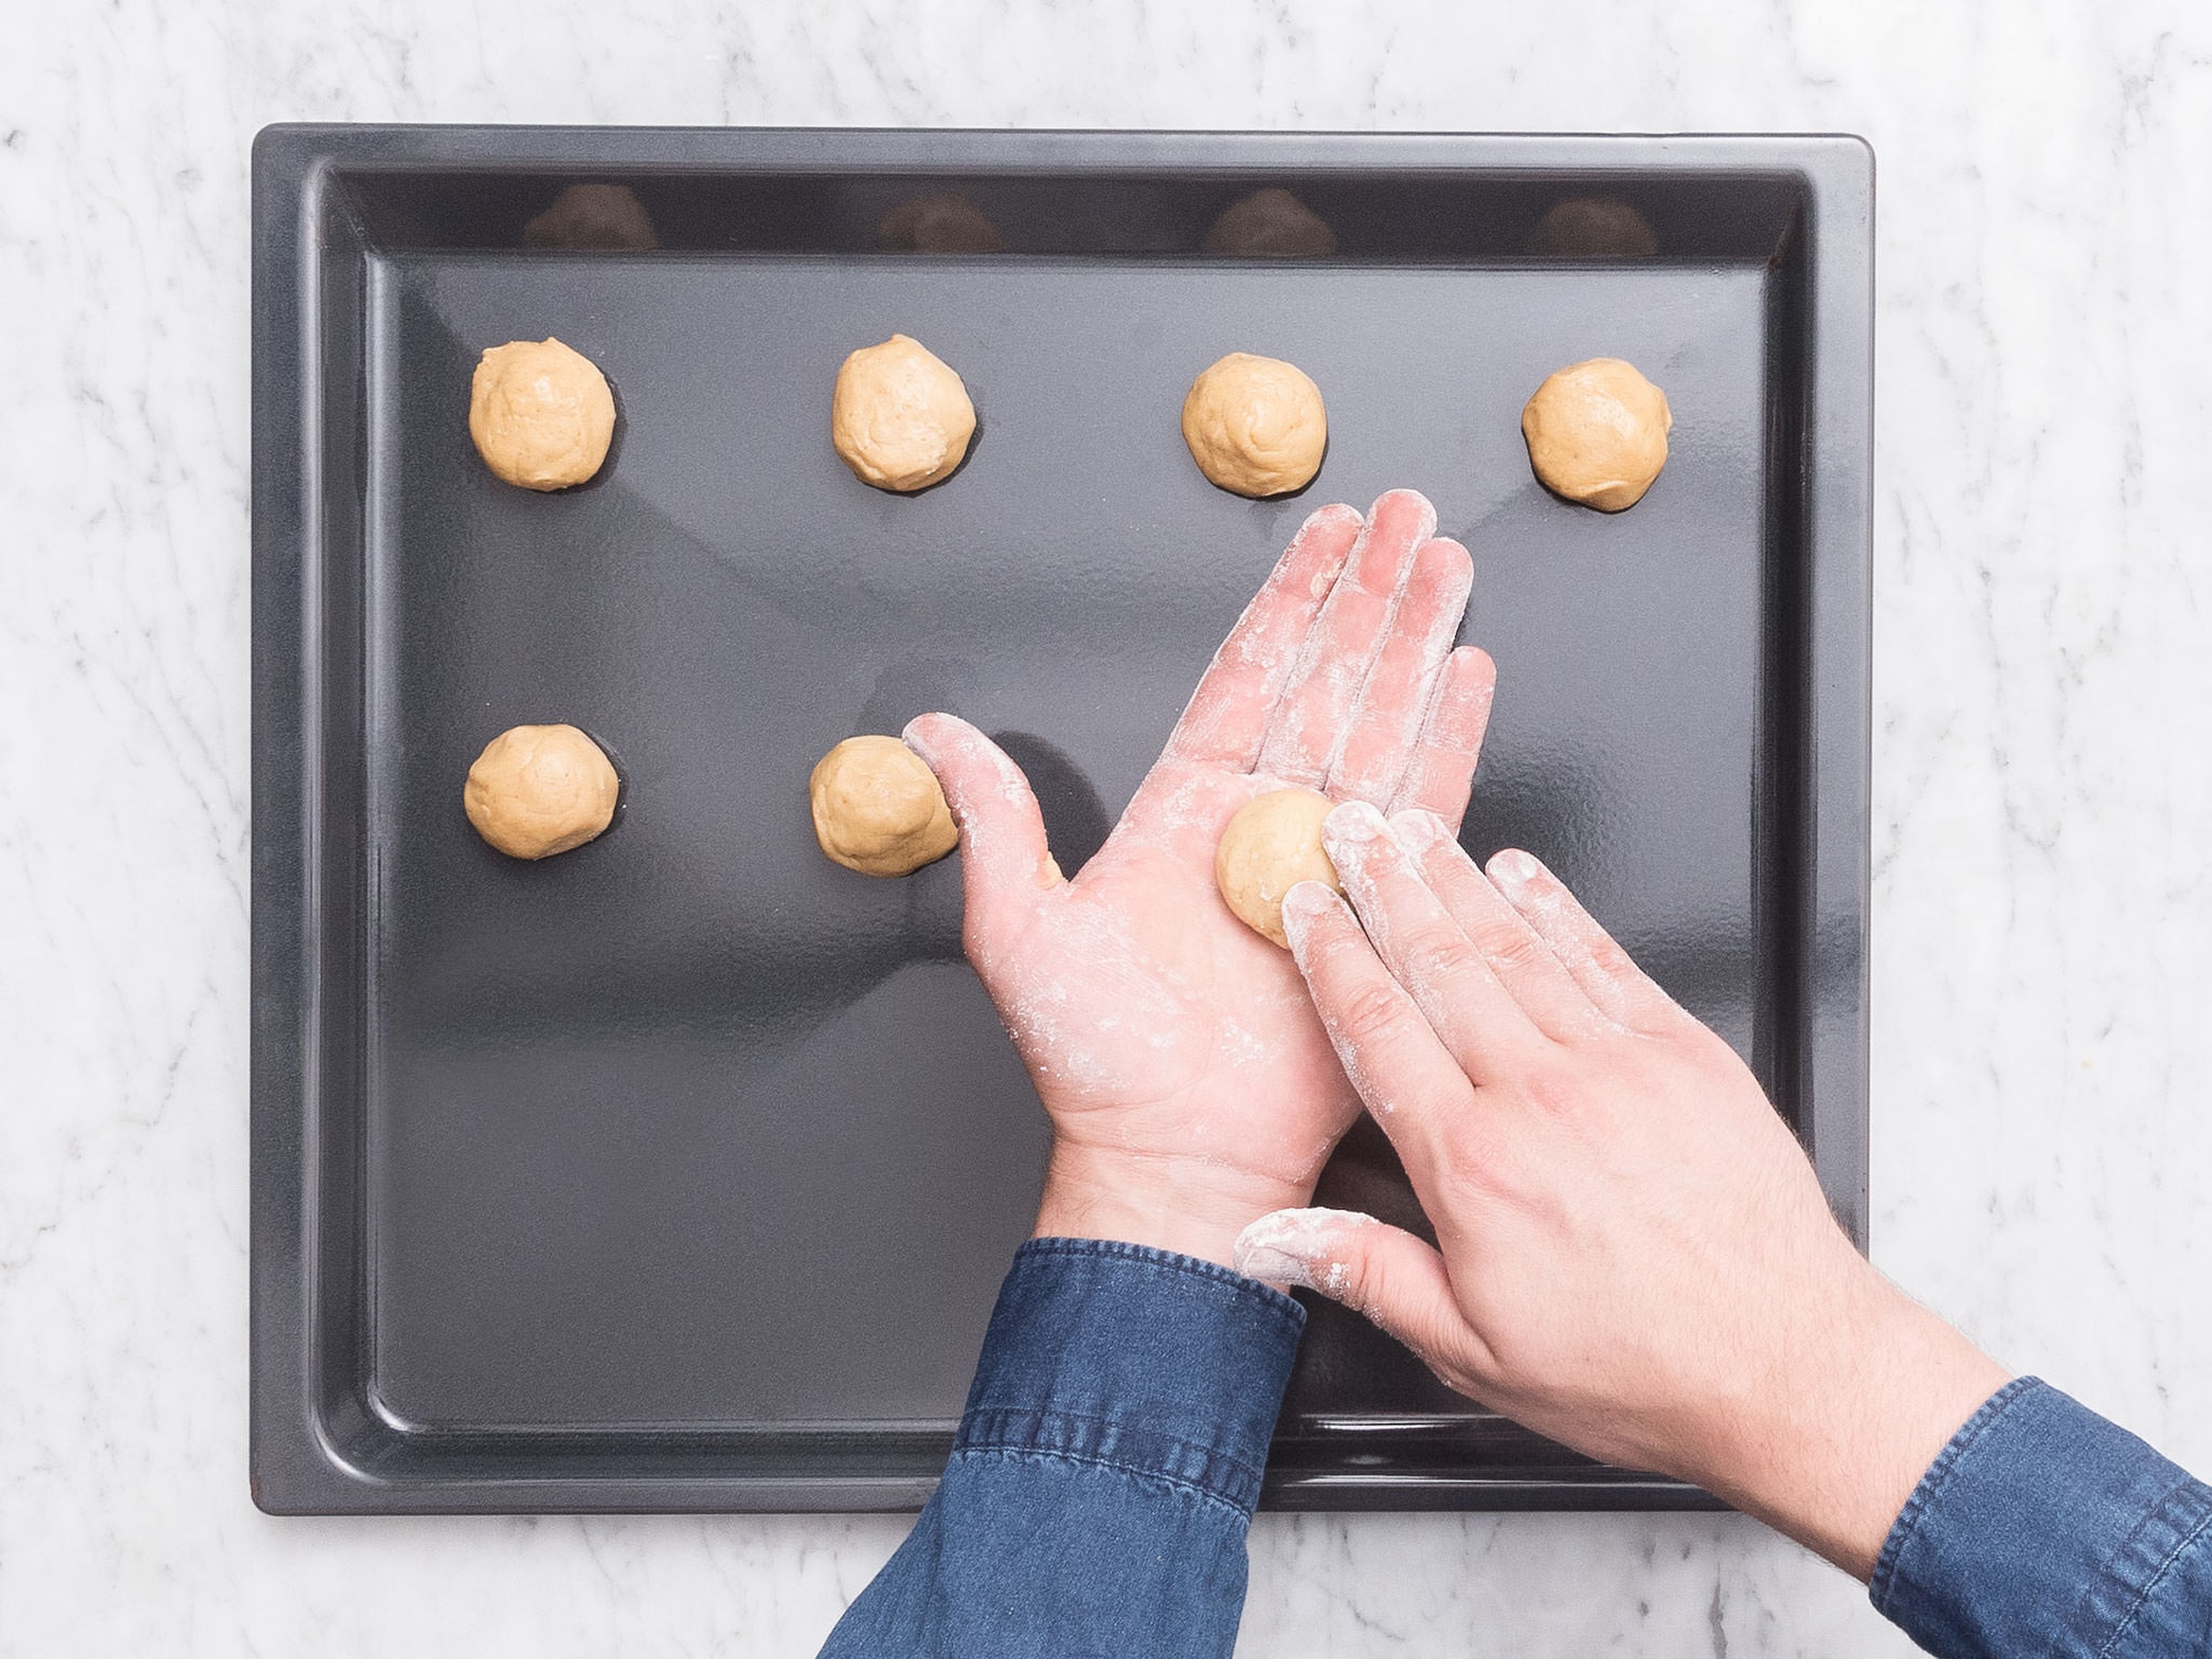 Use a tablespoon to measure out the cookies, roll into a smooth ball, and place on a lined baking sheet. Bake at 180°C/350°F for approx. 10 min. Remove from oven and let cool slightly before transferring to a wire rack.